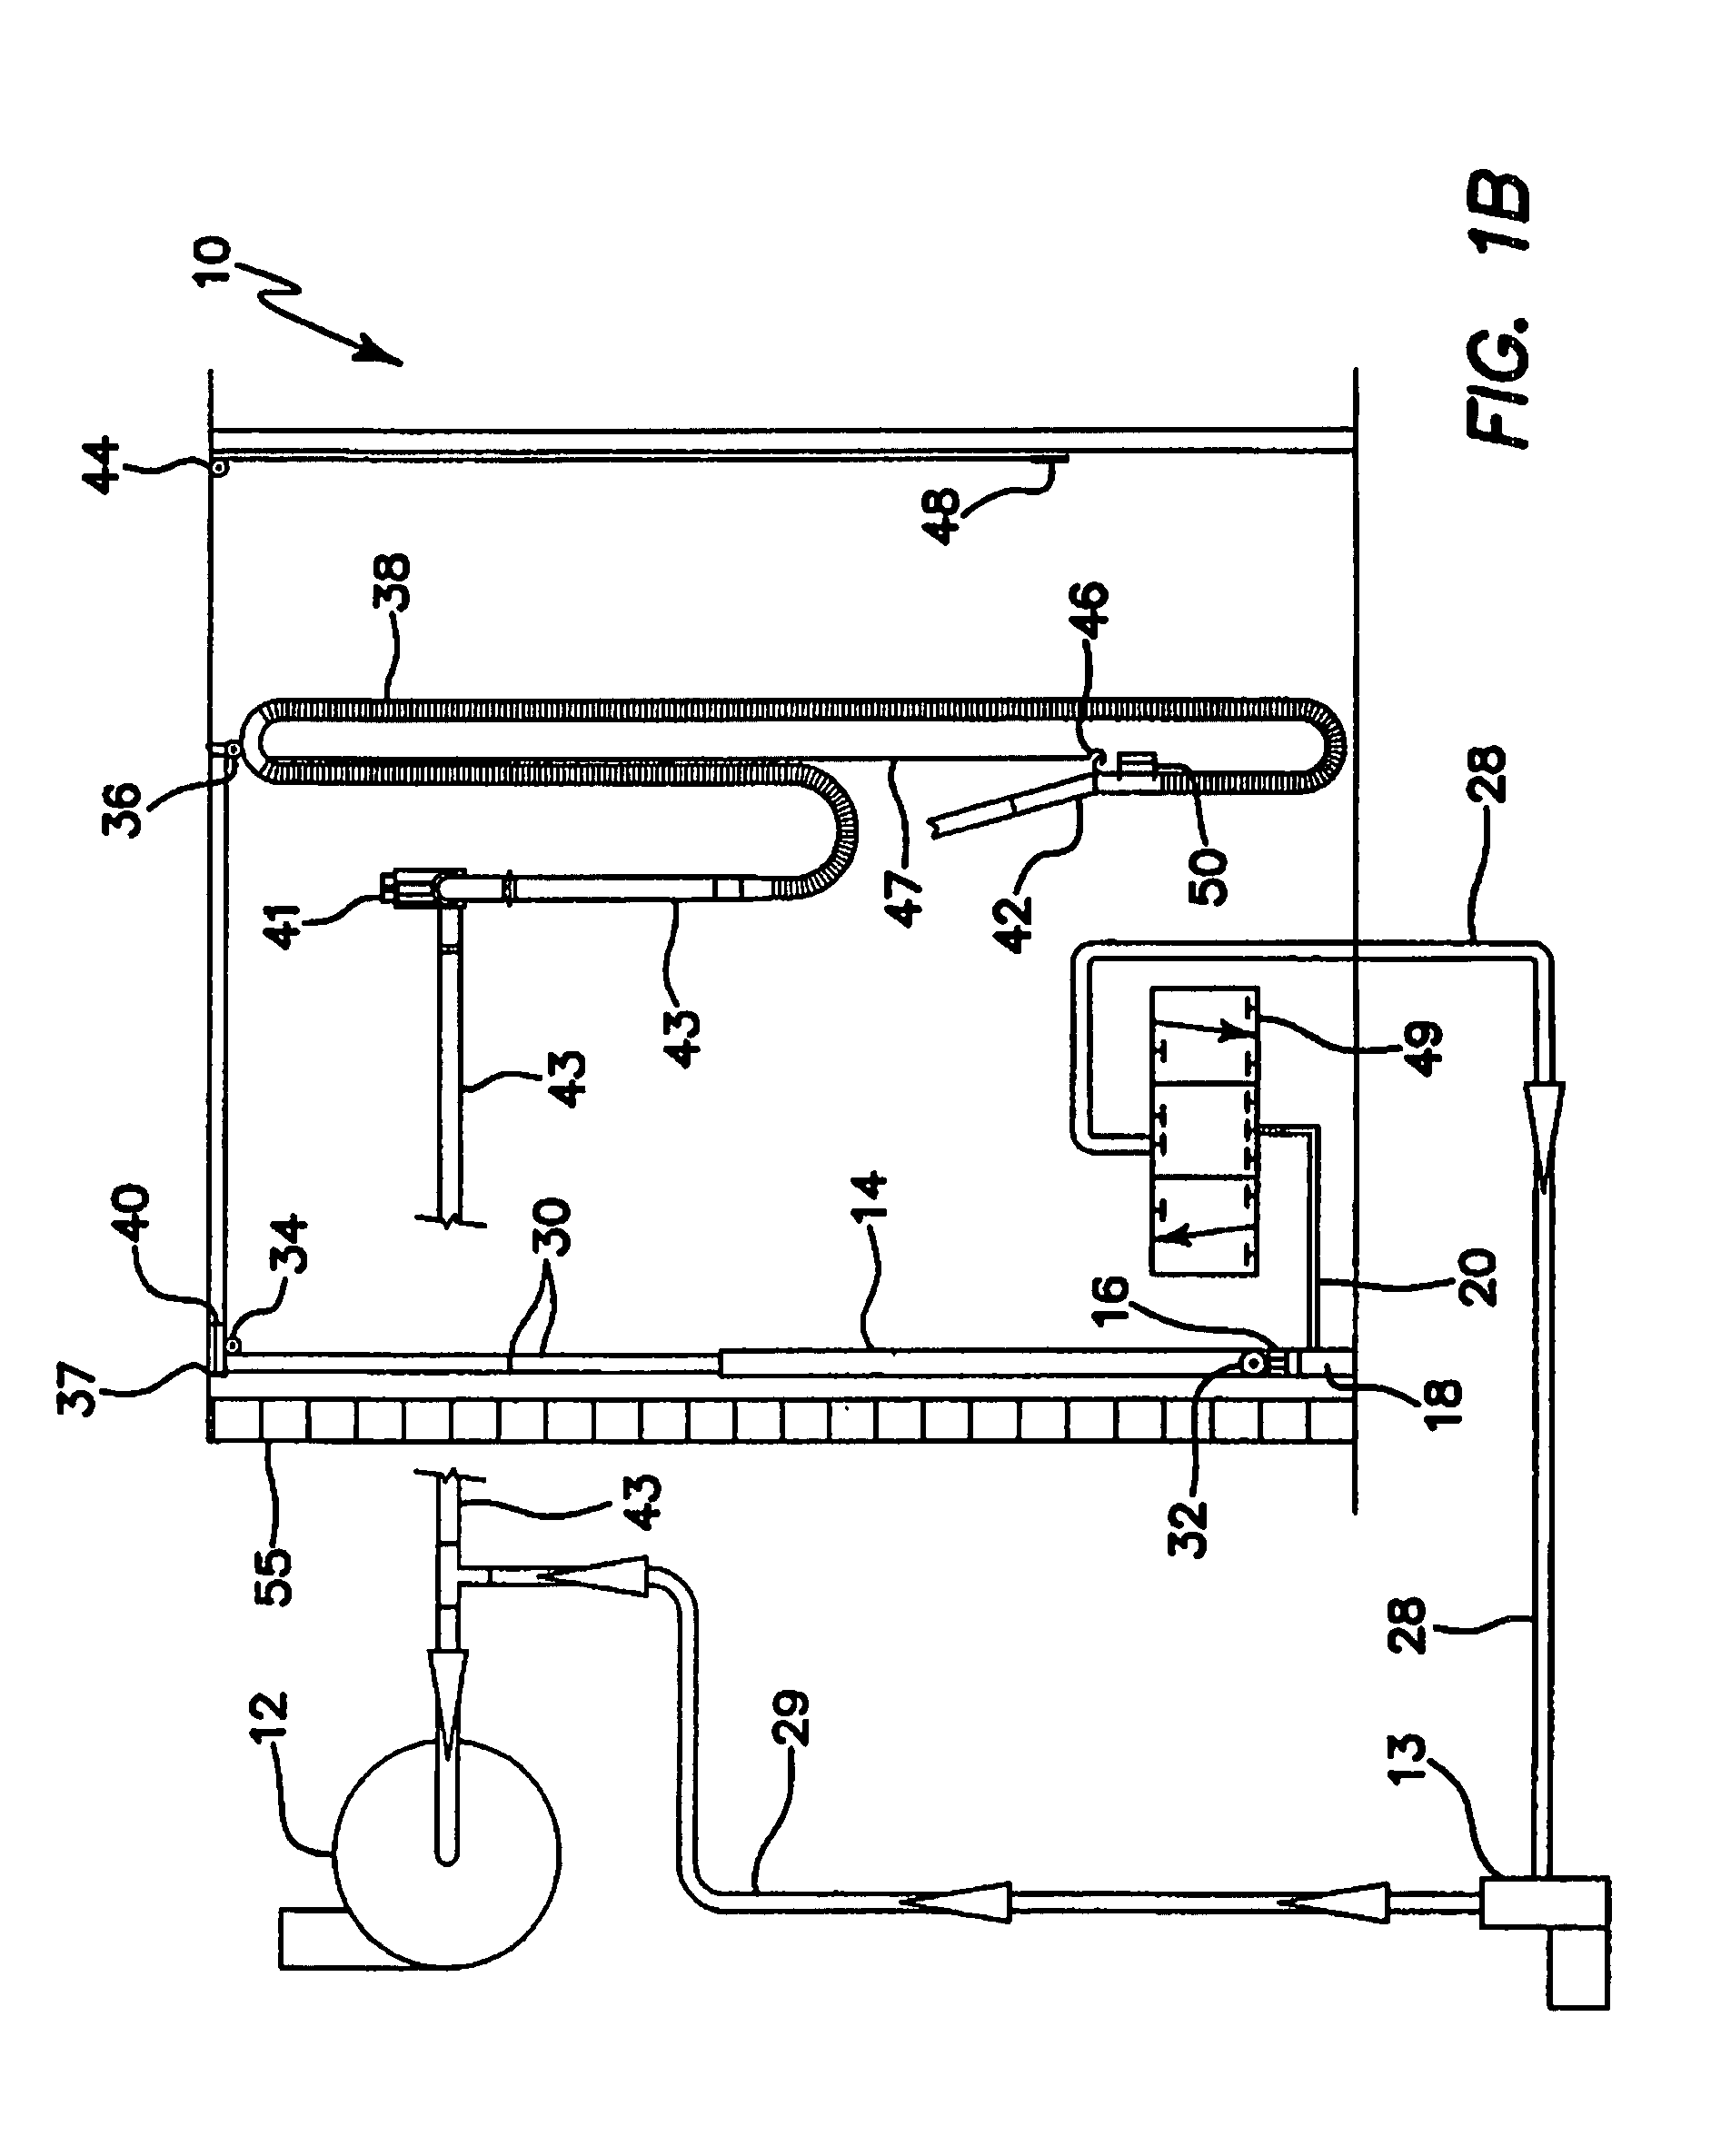 Automatic festooned hose apparatus for public transit vacuuming systems and methods for using same